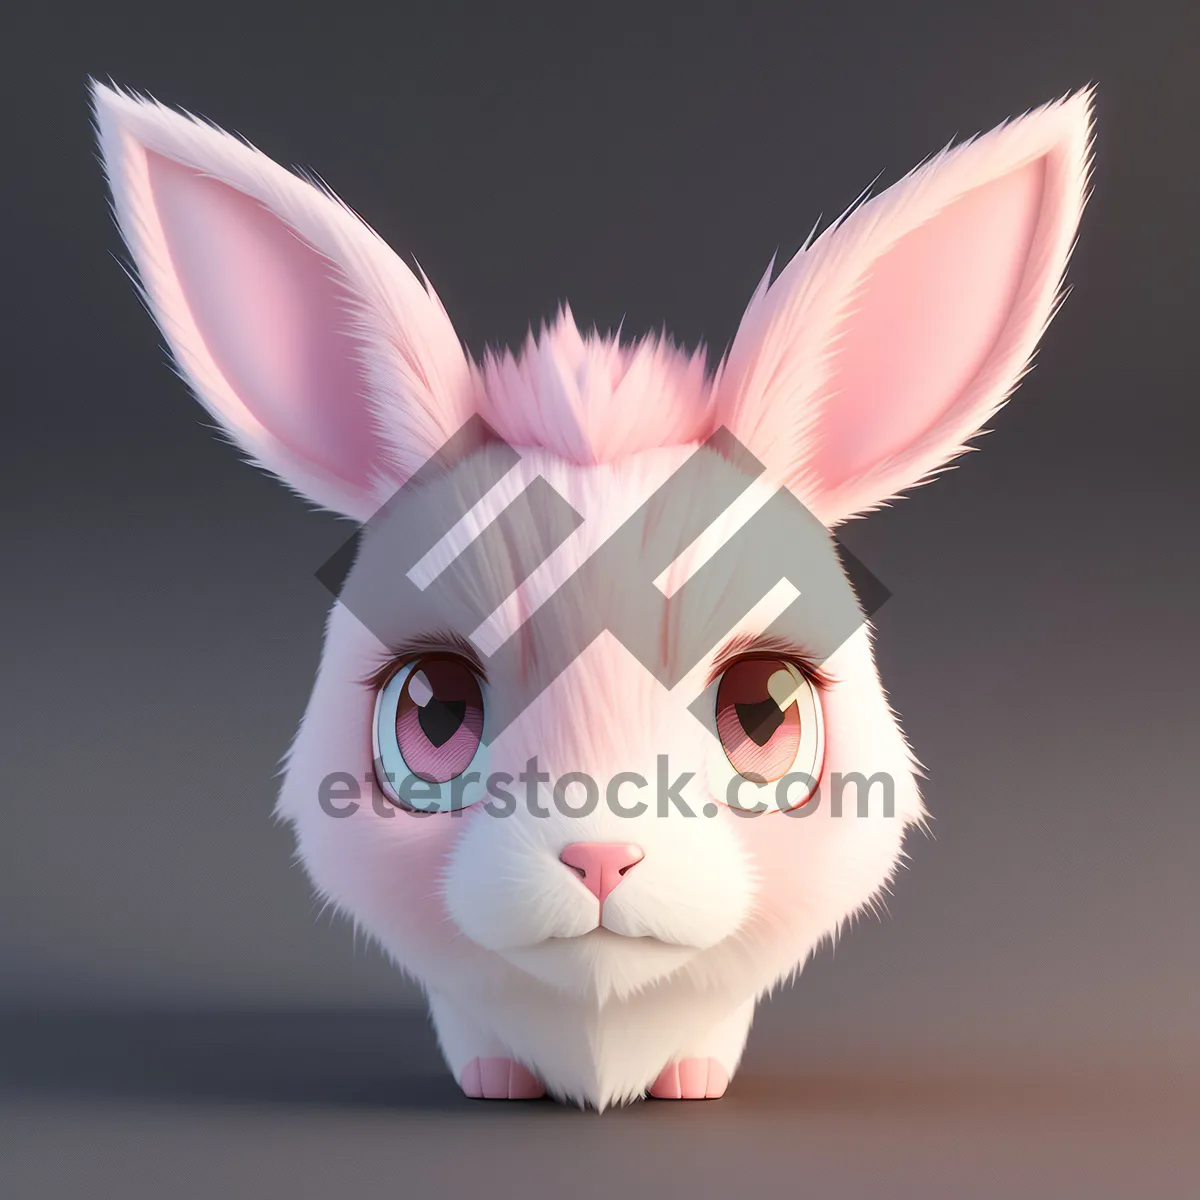 Picture of Fluffy Bunny Ears - Cute Domestic Pet with Funny Expression.